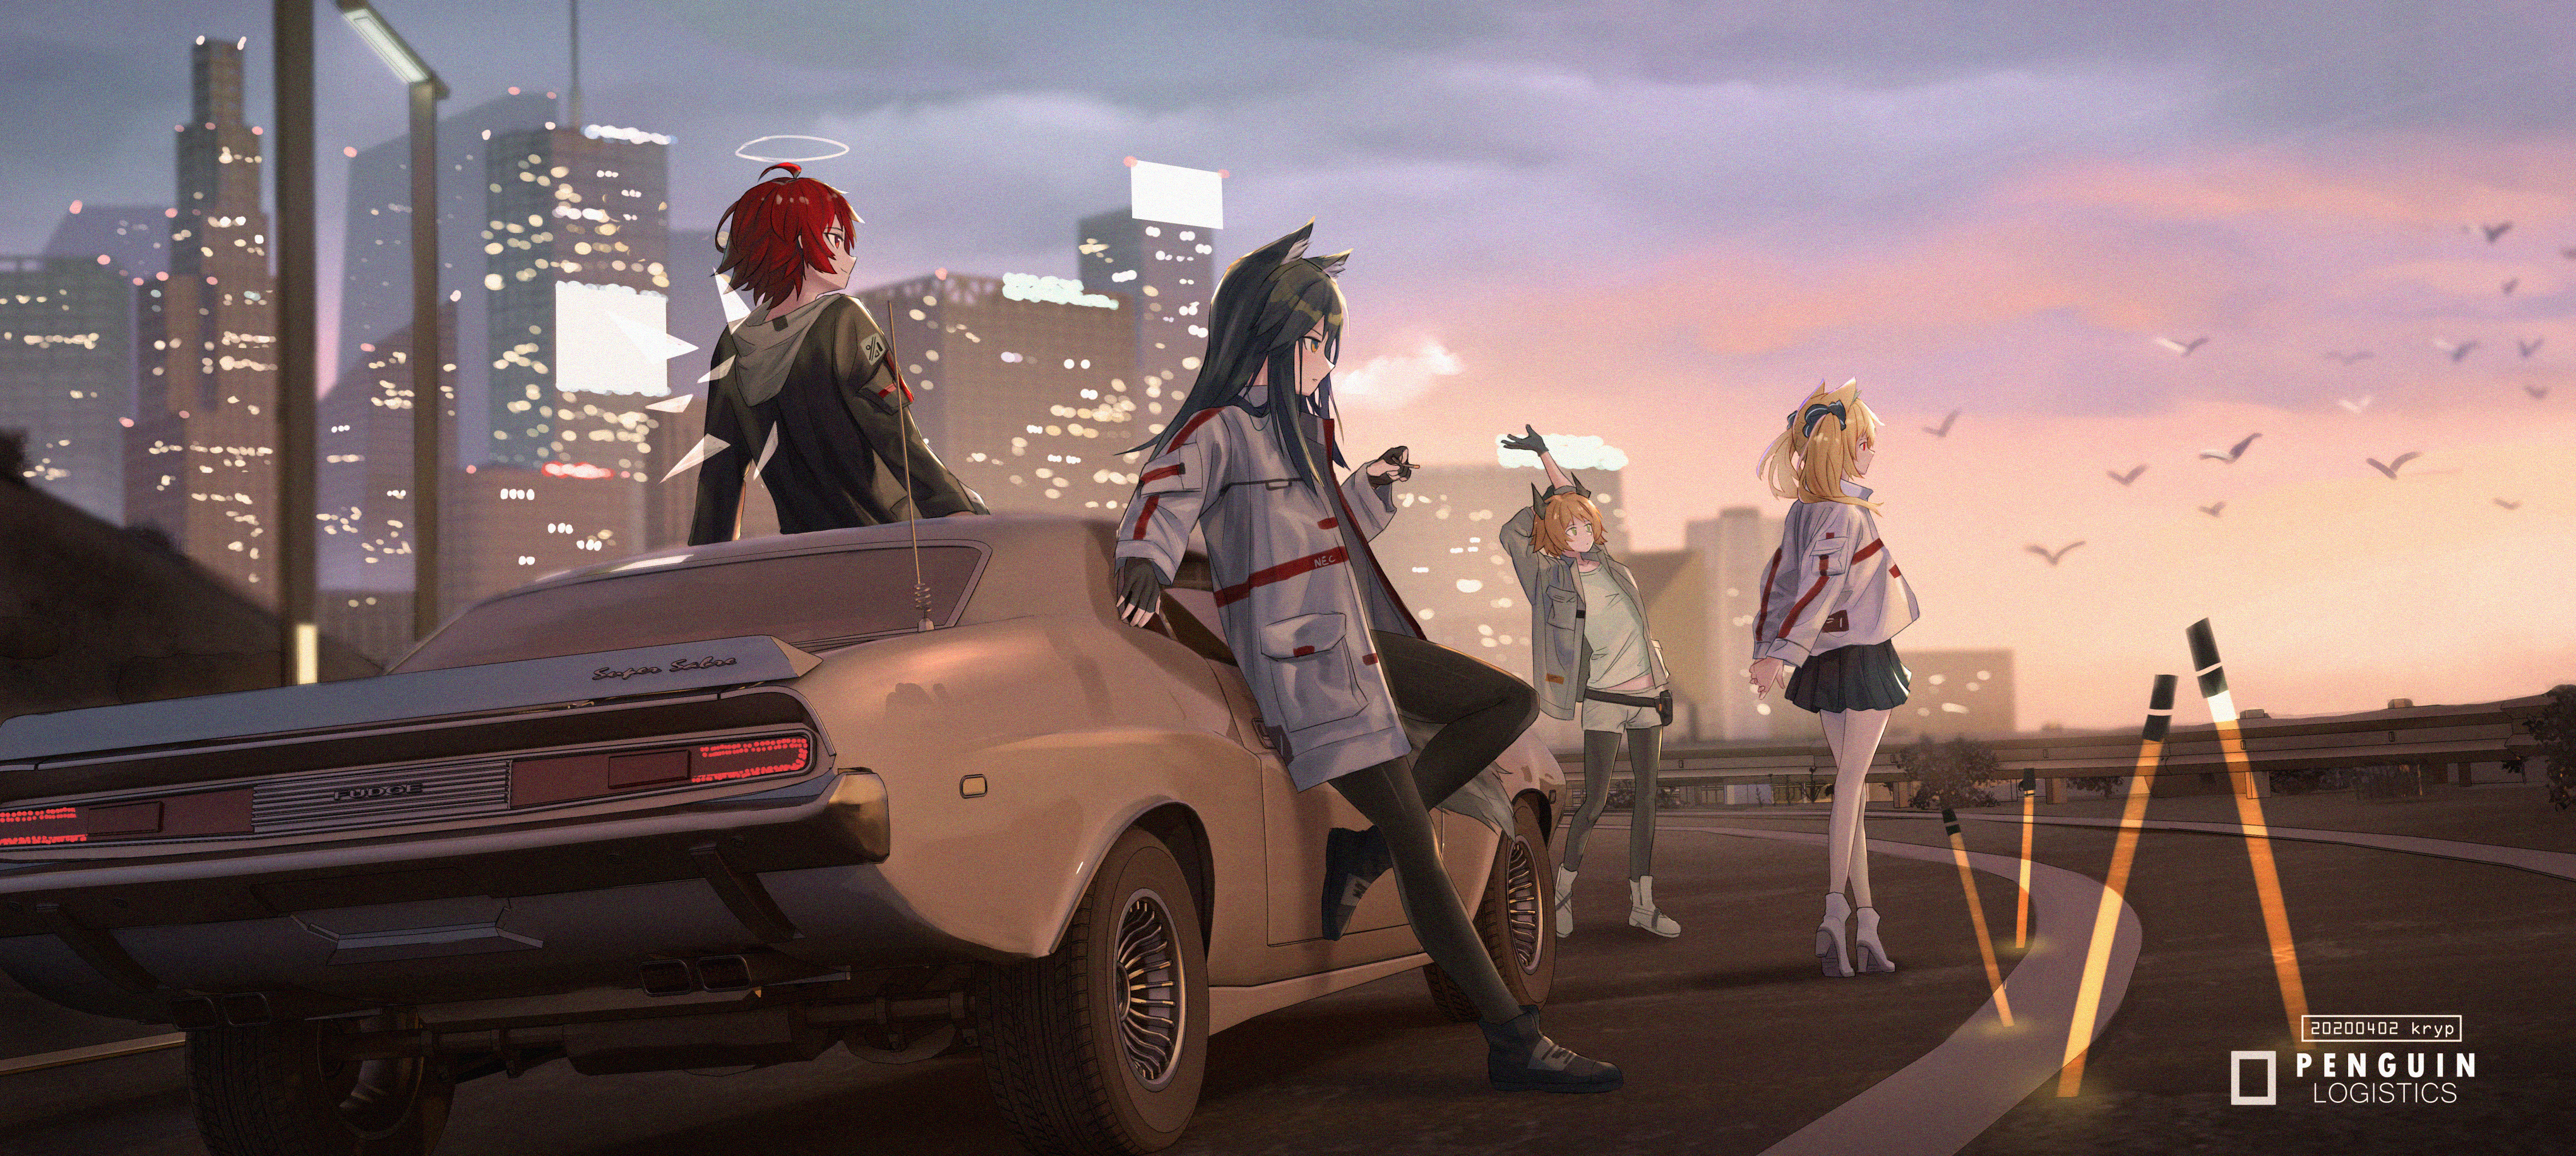 Anime 4512x2025 anime girls kryp132 Arknights Croissant (Arknights) Exusiai (Arknights) Sora (Arknights) Texas (Arknights) animal ears sunset road car city light effects group of women pantyhose wolf girls halo